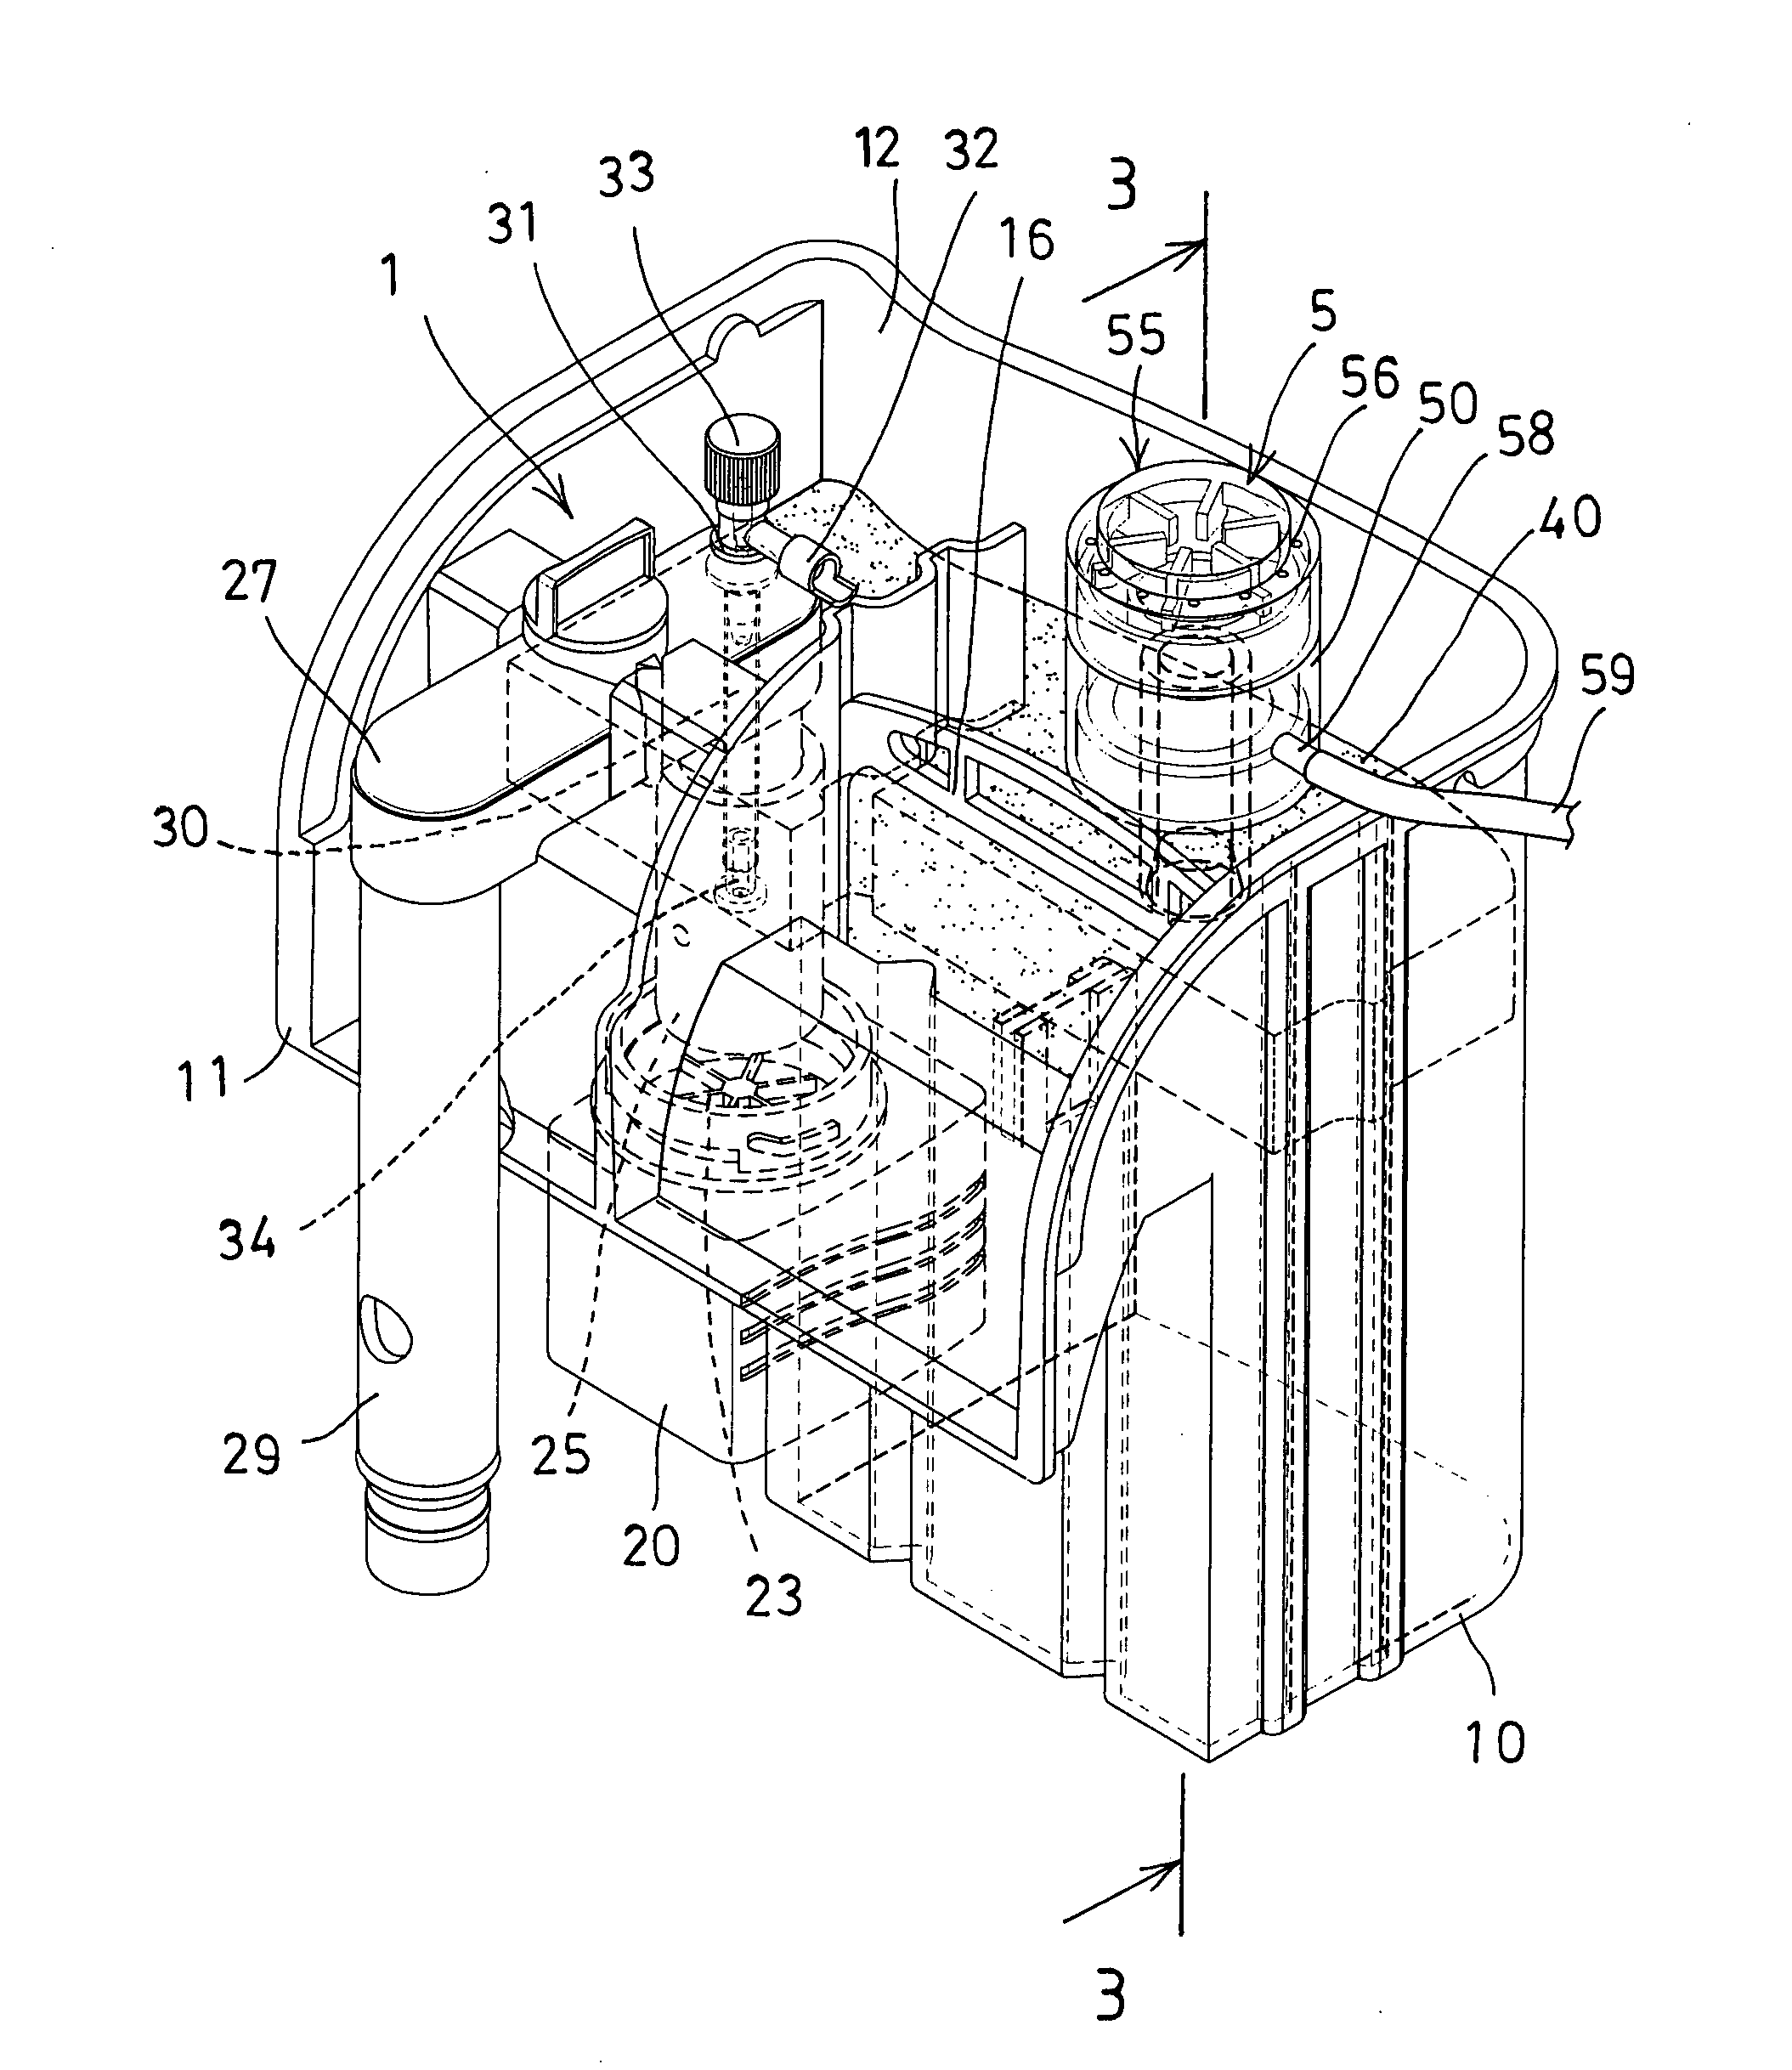 Aerating or air bubble collecting device